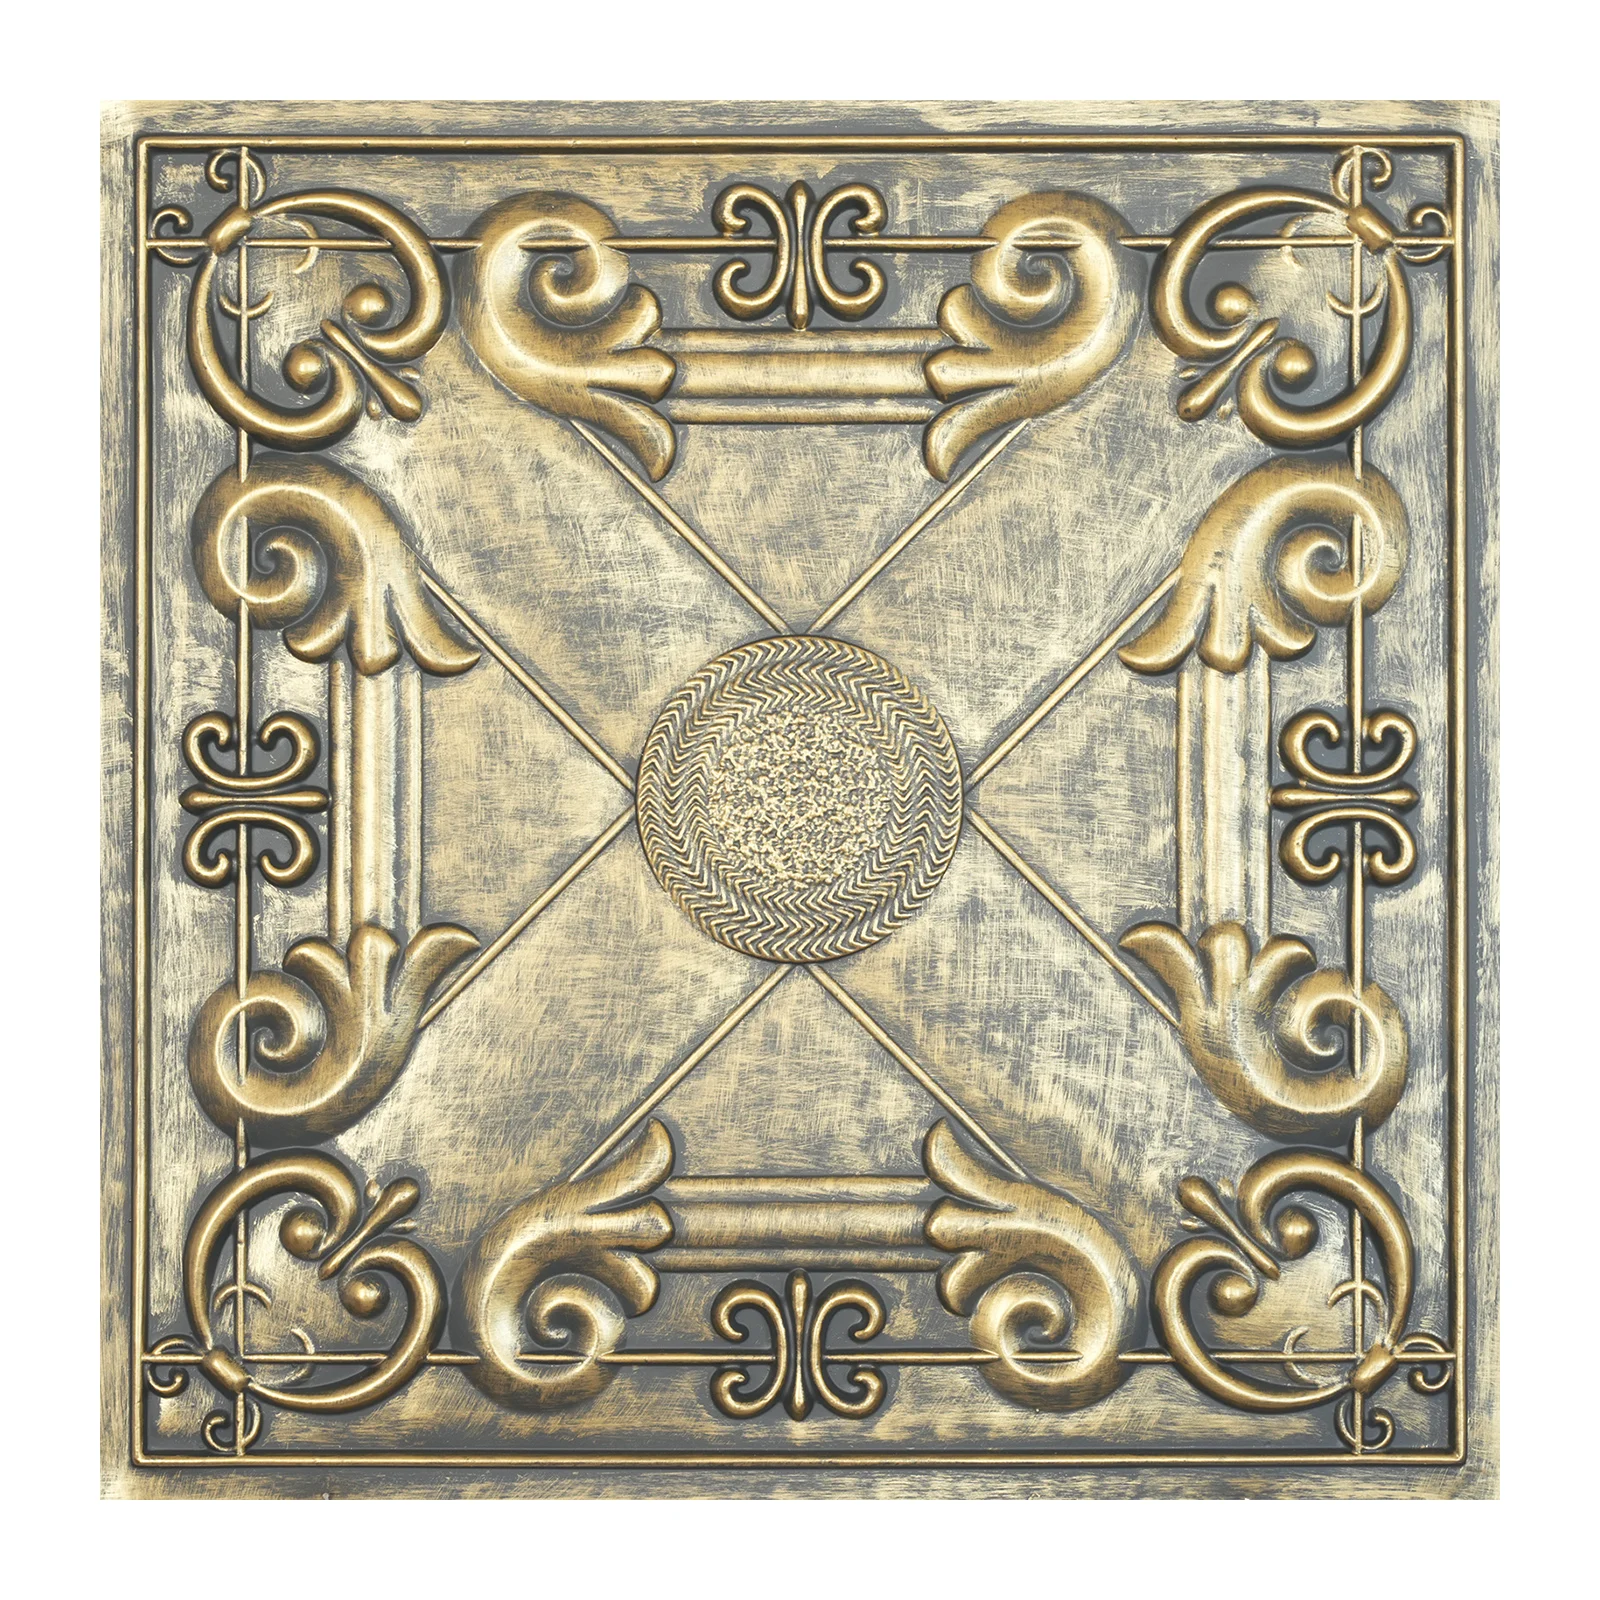 Faux finishing distressed Victorian style ceiling panels Decorative tin wall tile Easy to Install PVC Panels PL22 Ancient gold